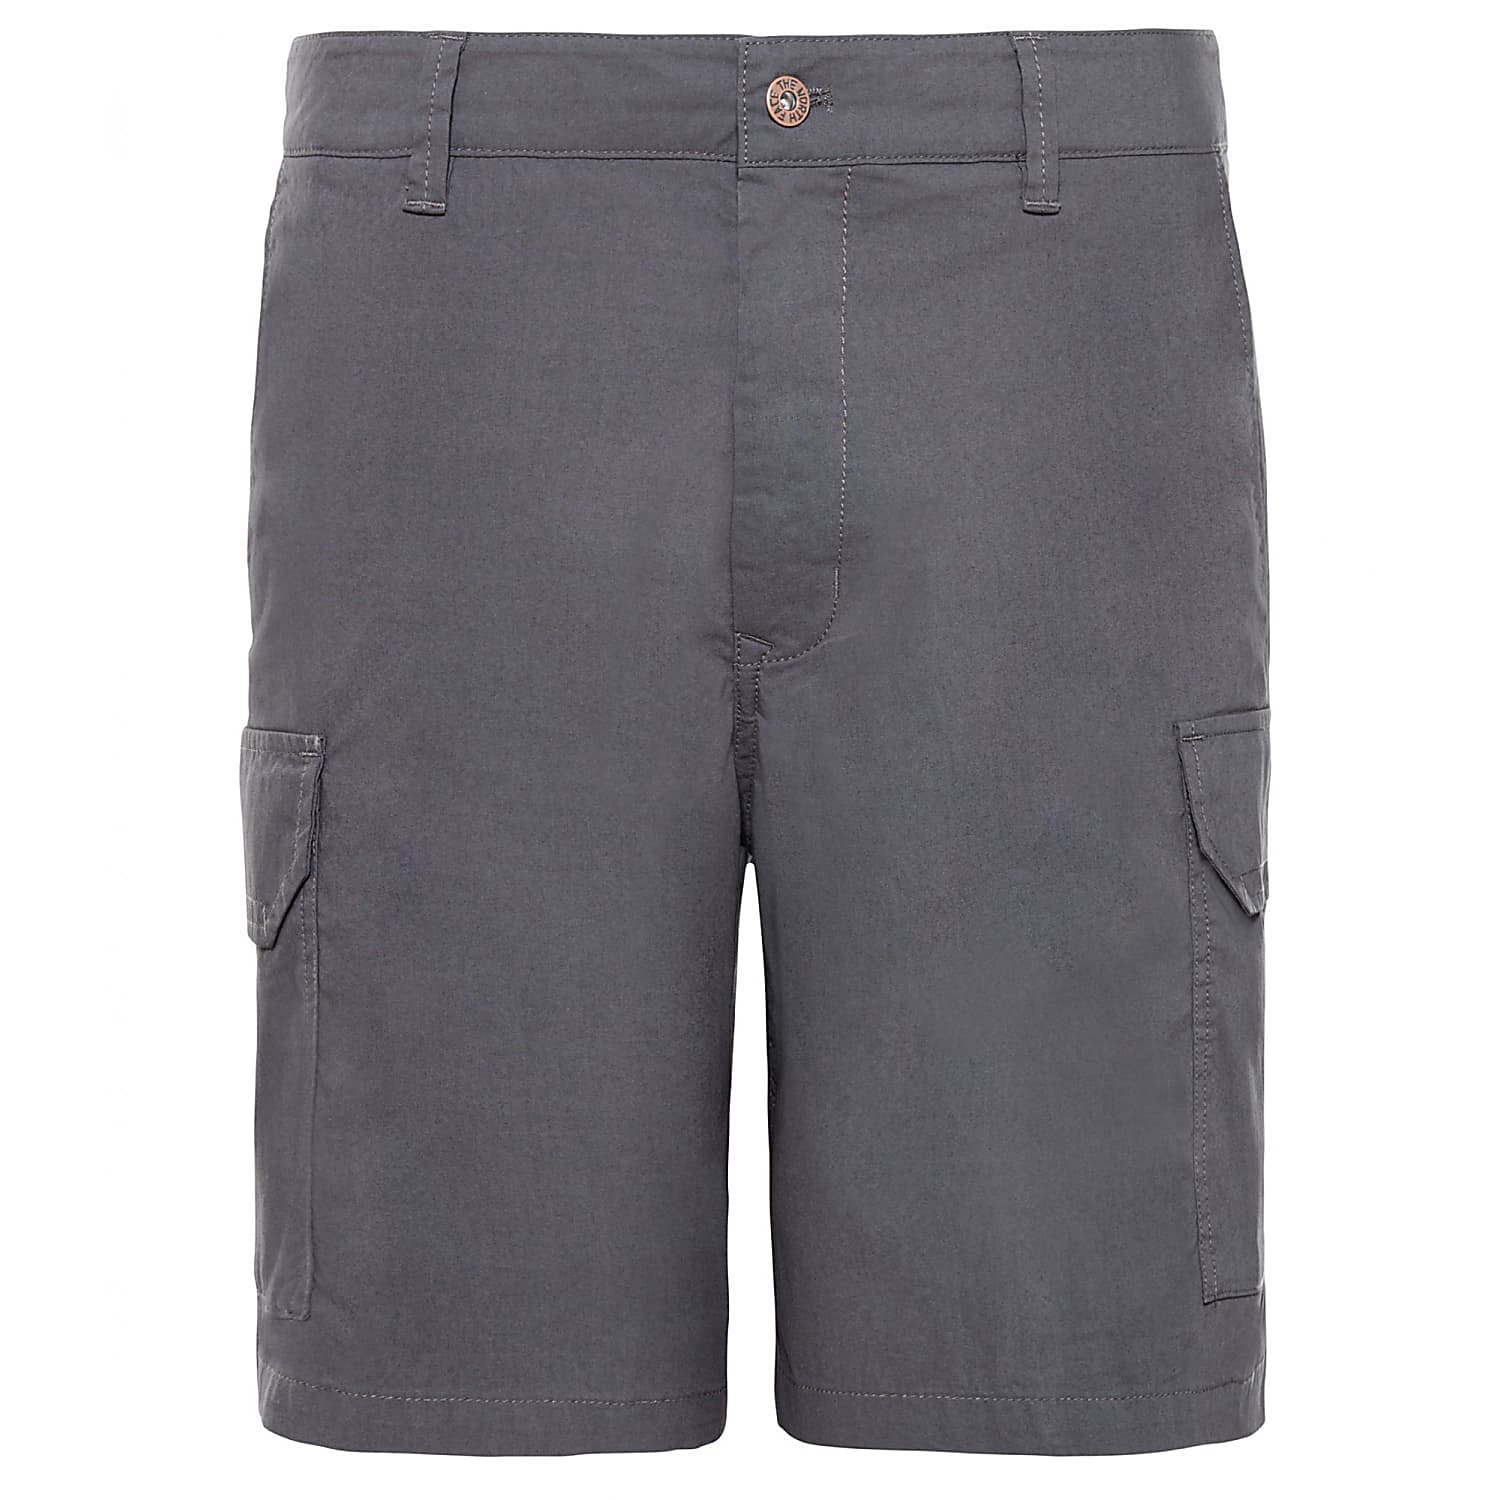 north face junction shorts